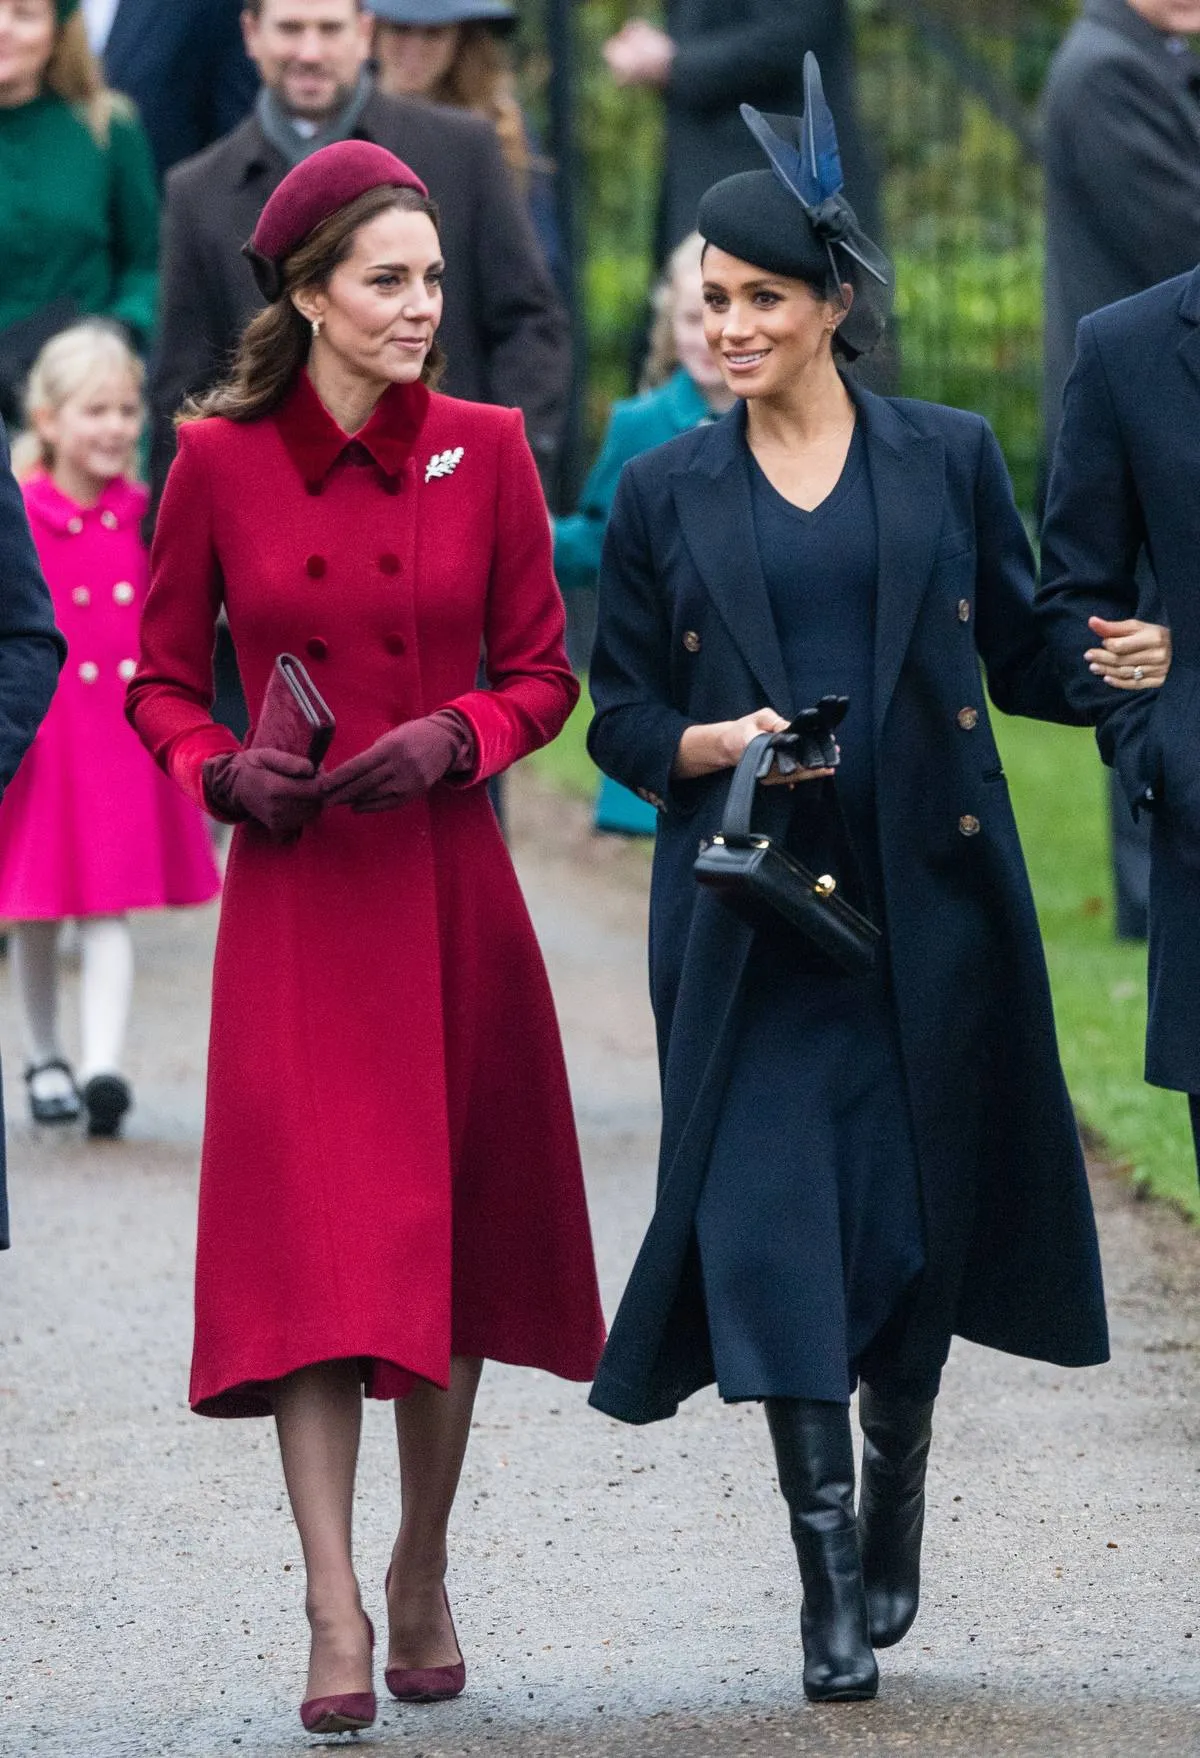 Meghan Markle wears a beret with navy feathers while walking next to Kate Middleton.